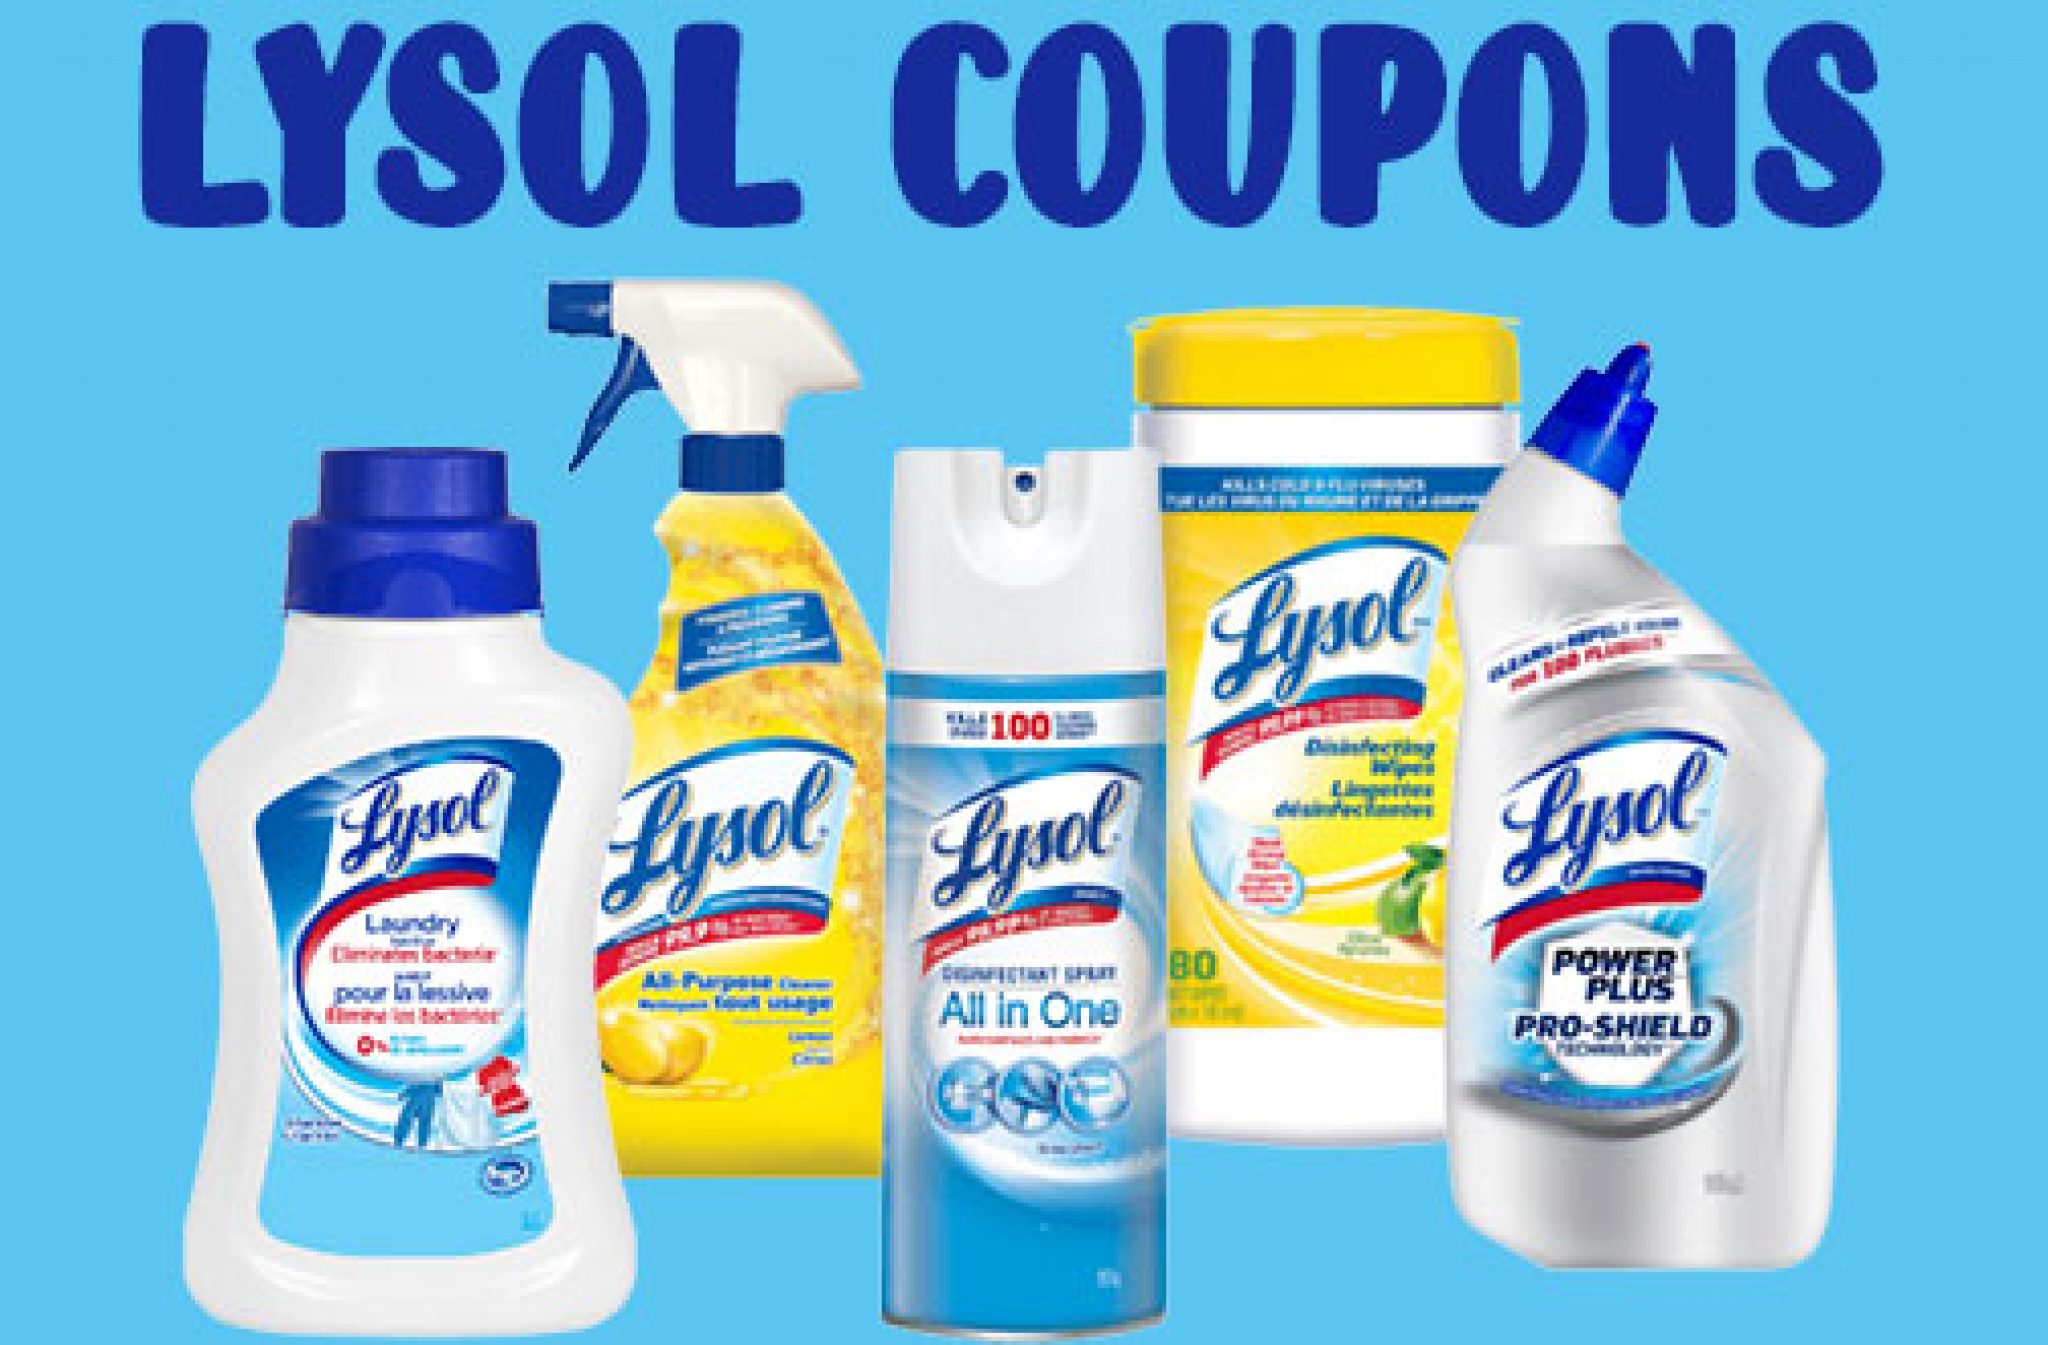 lysol-coupons-canada-save-up-to-7-off-deals-from-savealoonie